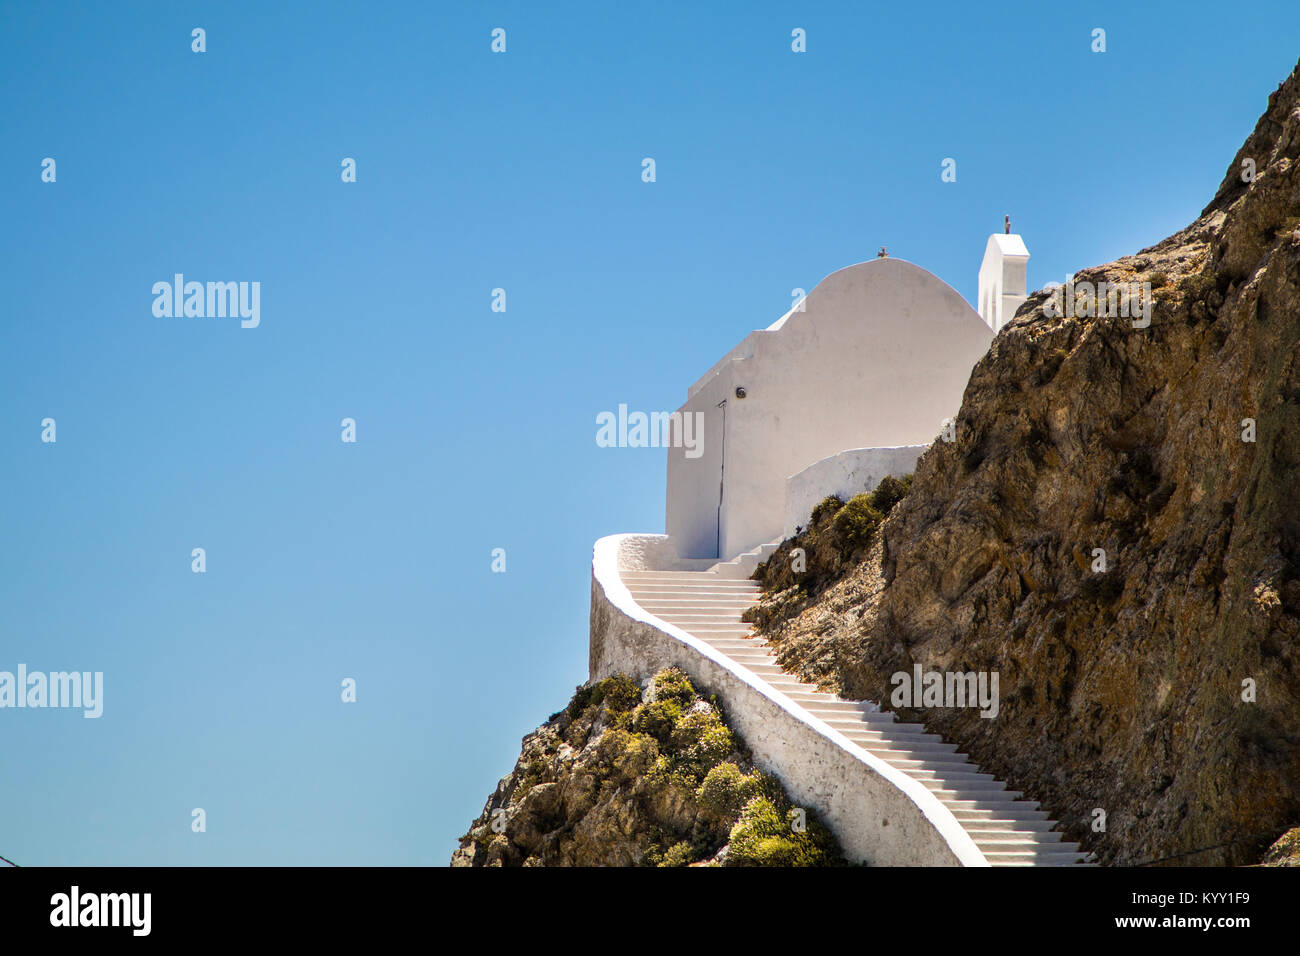 Low angle view of church on mountain against clear blue sky Stock Photo